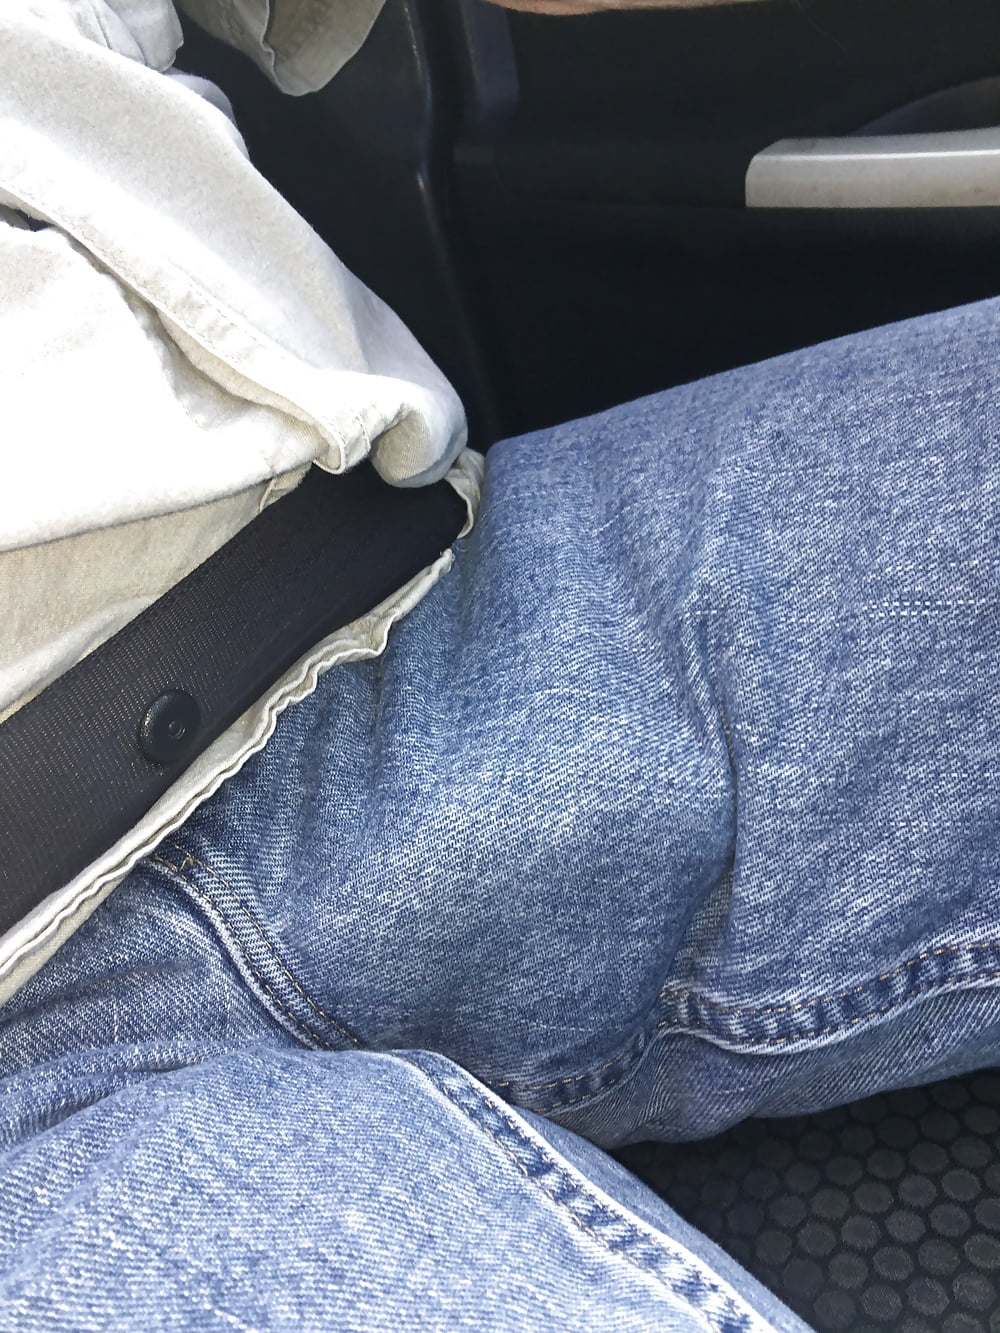 Stuffing Cock Into Jeans